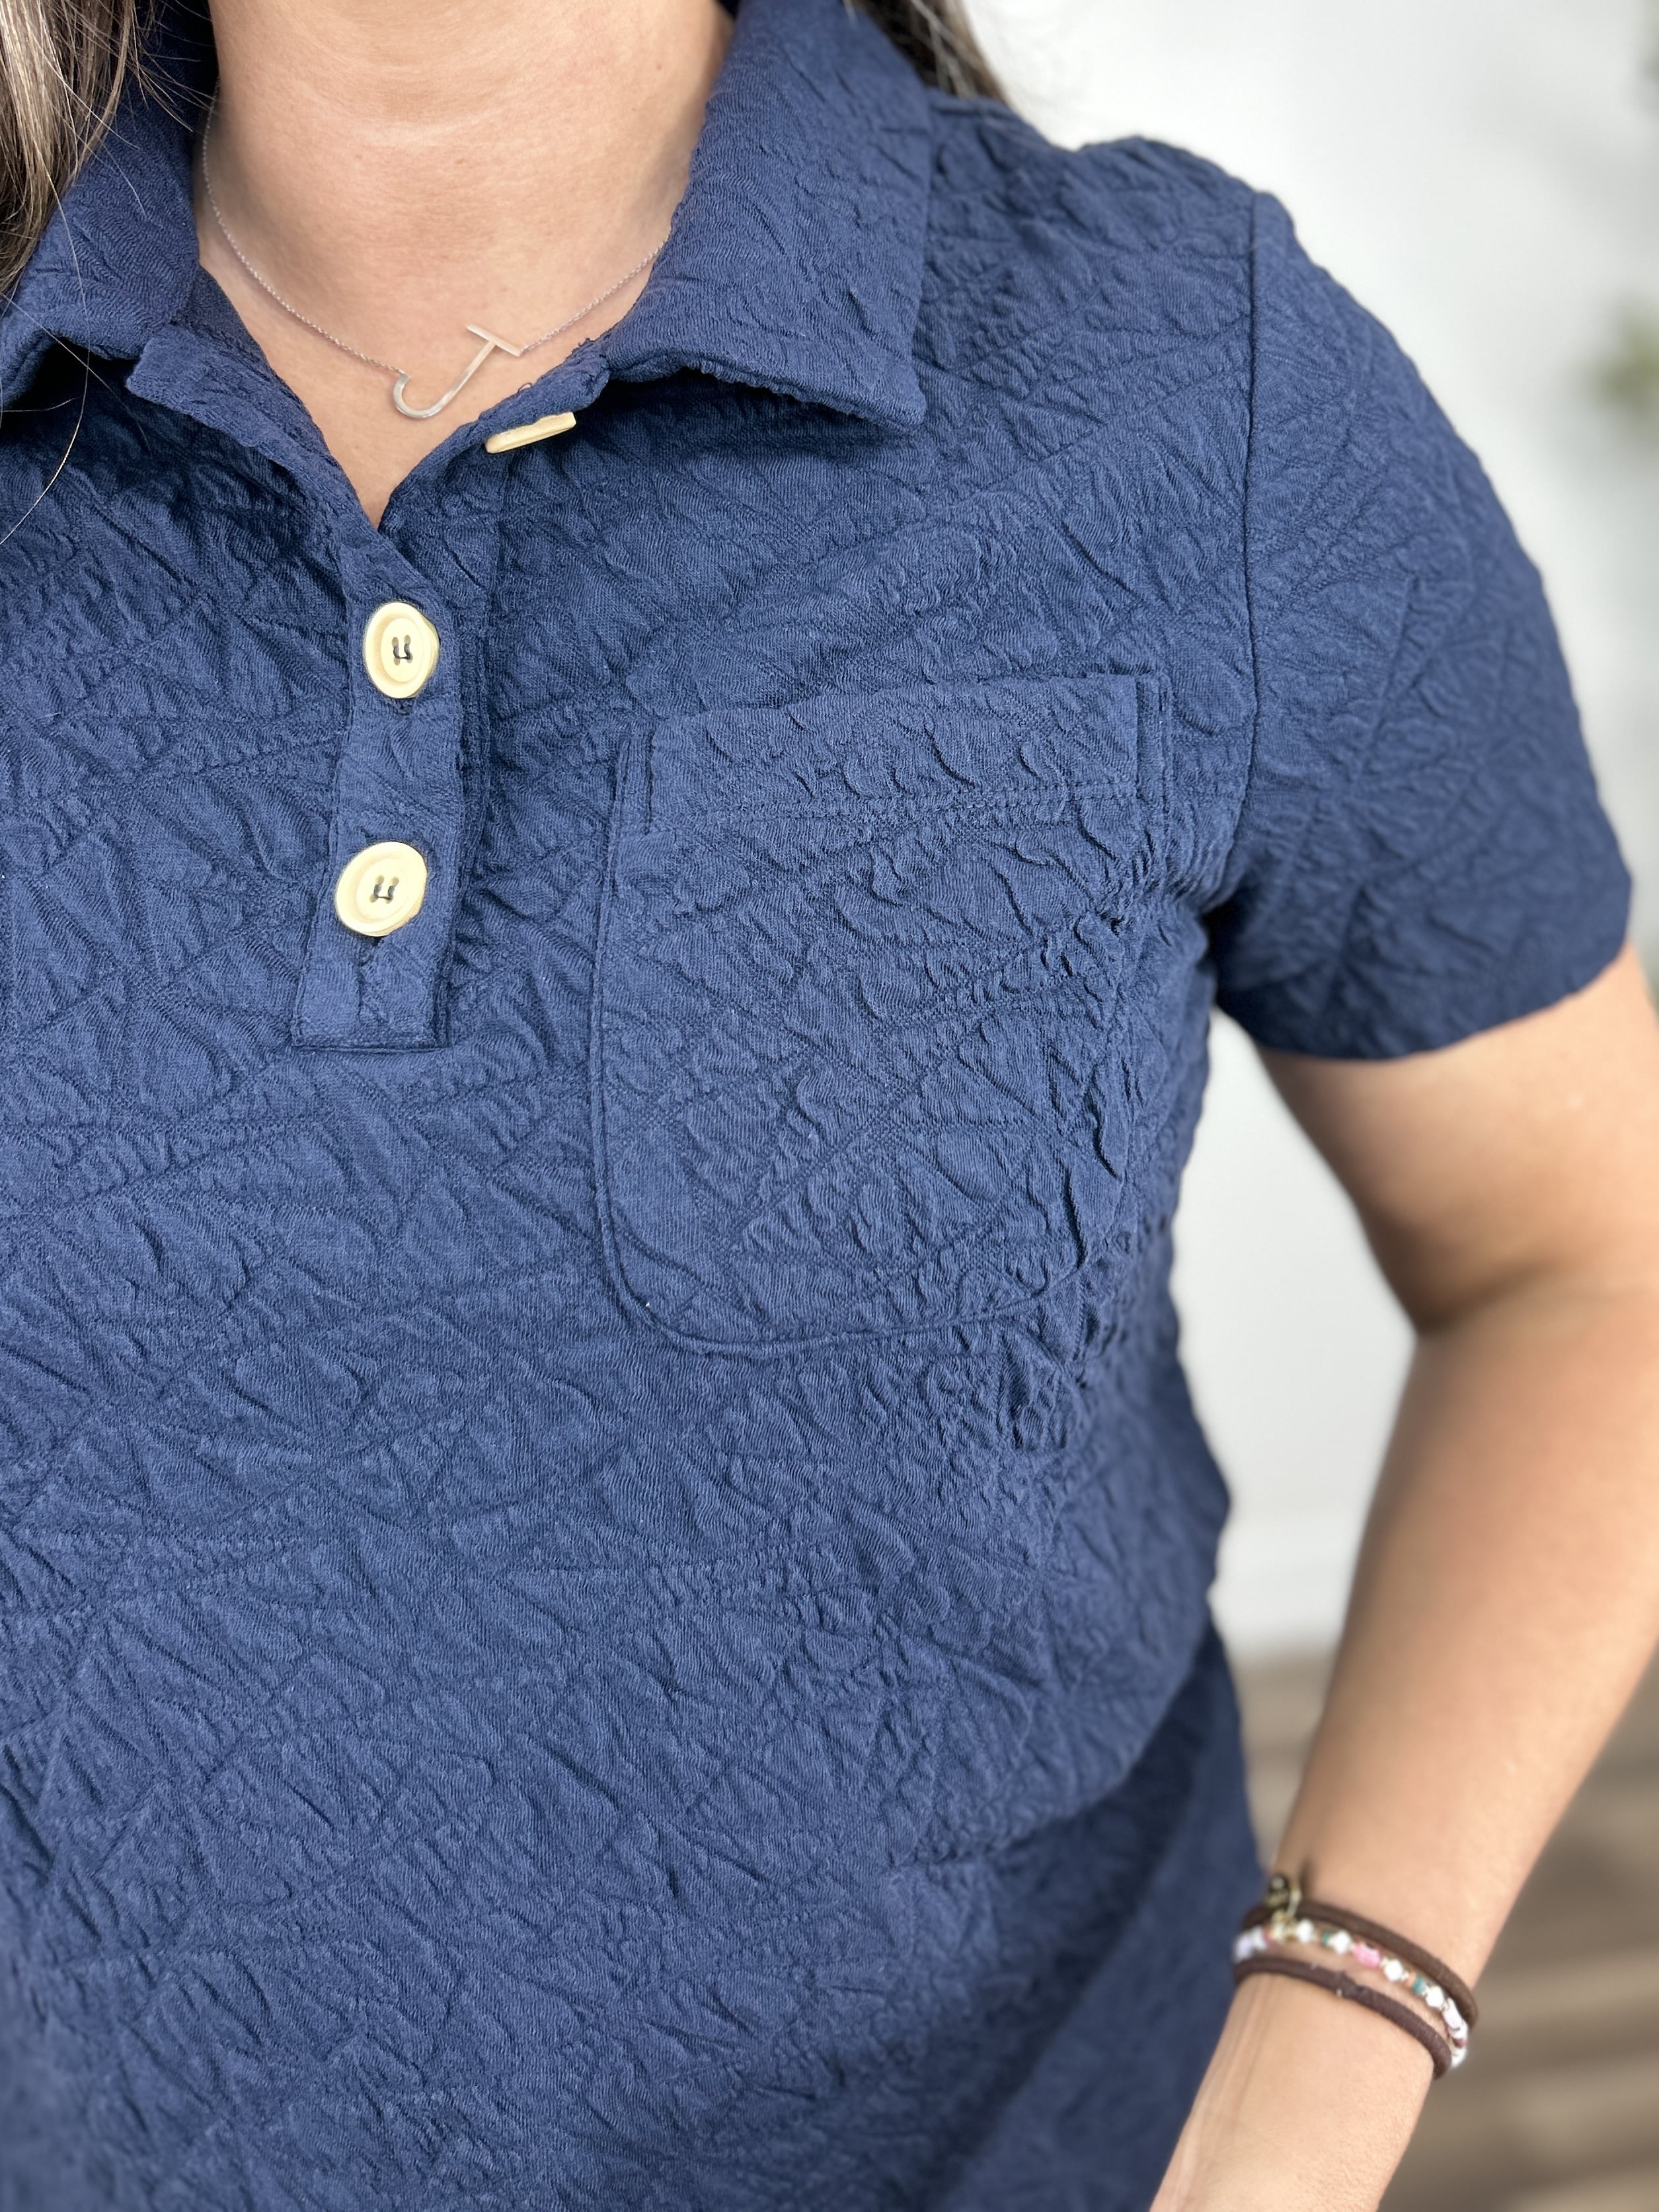 Upclose view of the women's navy blue textured henley top with 3 functional chest buttons and a singular chest pocket.